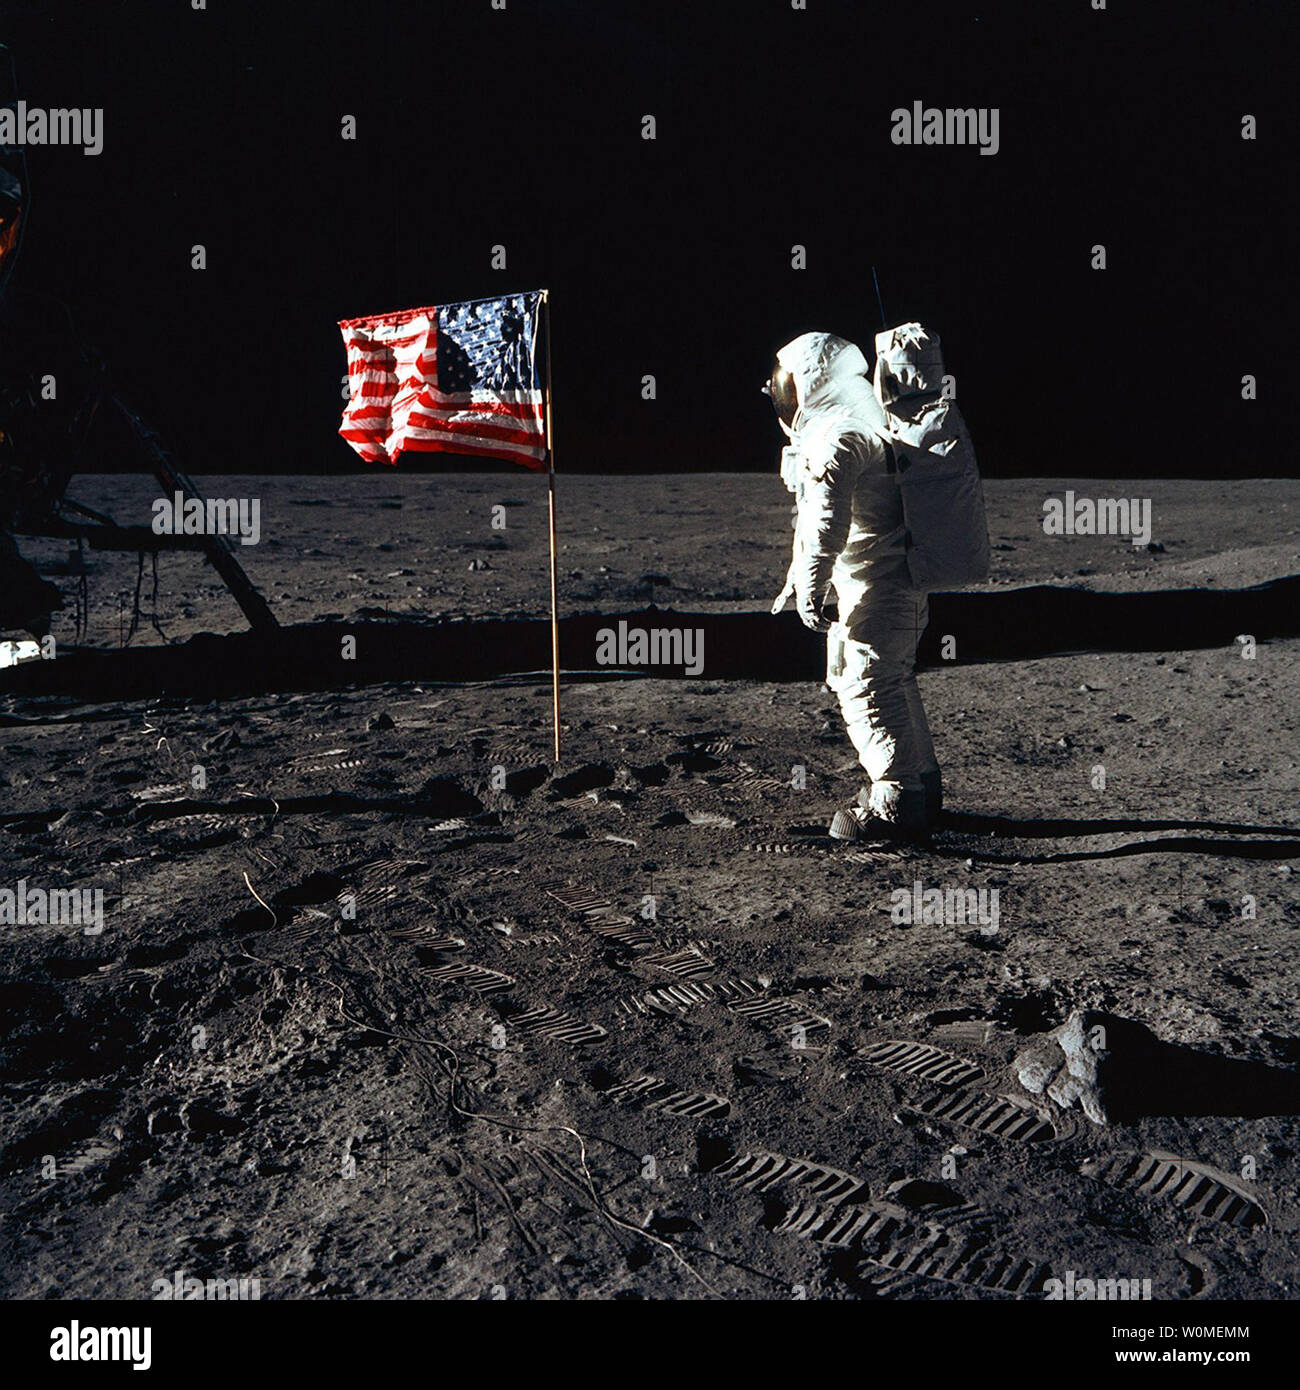 Astronaut Buzz Aldrin poses for a photograph beside the deployed United States flag during the Apollo 11 mission on the surface of the Moon on July 20, 1969. NASA marks the 40th anniversary of the Apollo 11 mission to the Moon and the historic first 'moonwalk' this year. During the eight-day space mission, Armstrong and Aldrin explored the Moon's surface and brought back rock samples for scientists to study. Collins piloted the command module in the lunar orbit during their 22-hour stay on the moon. (UPI Photo/NASA) Stock Photo